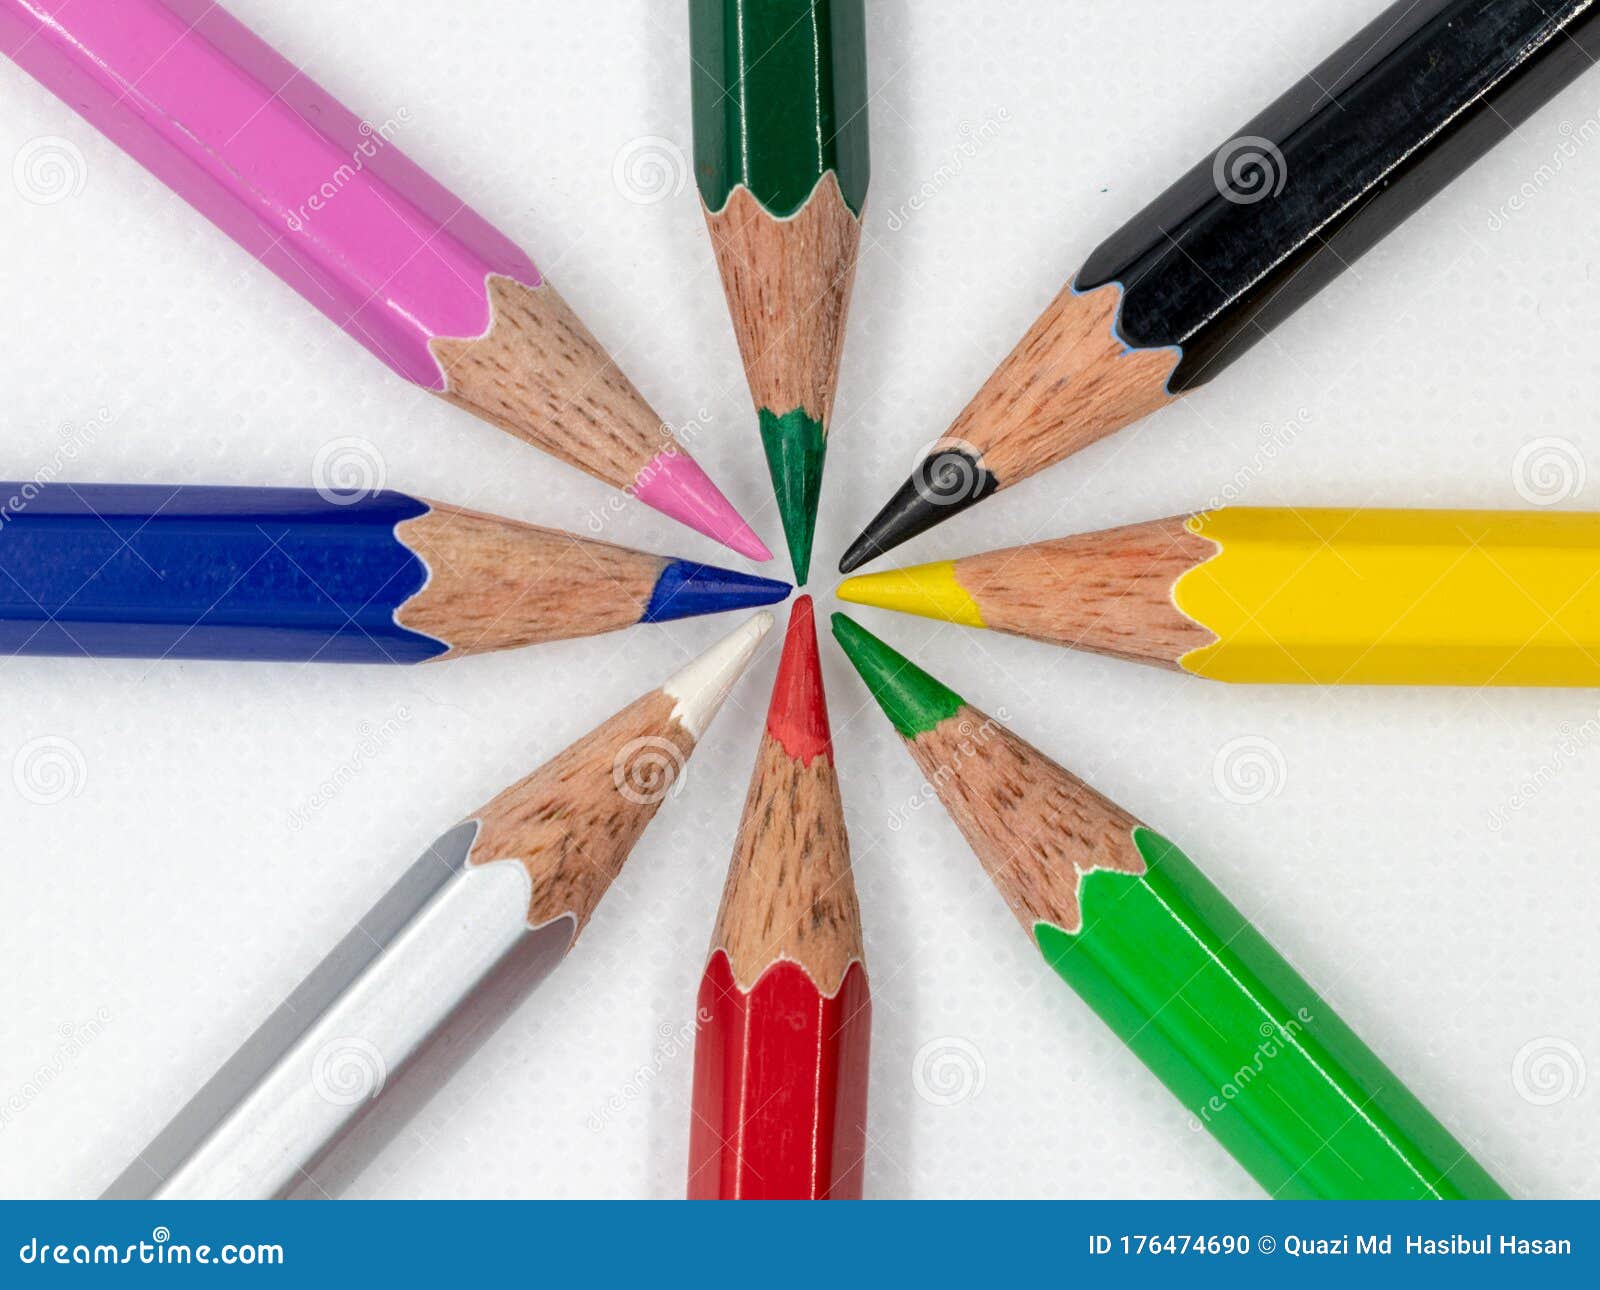 https://thumbs.dreamstime.com/z/color-pencil-different-color-colored-pencil-instruction-will-teach-you-some-basic-colored-pencil-techniques-will-176474690.jpg